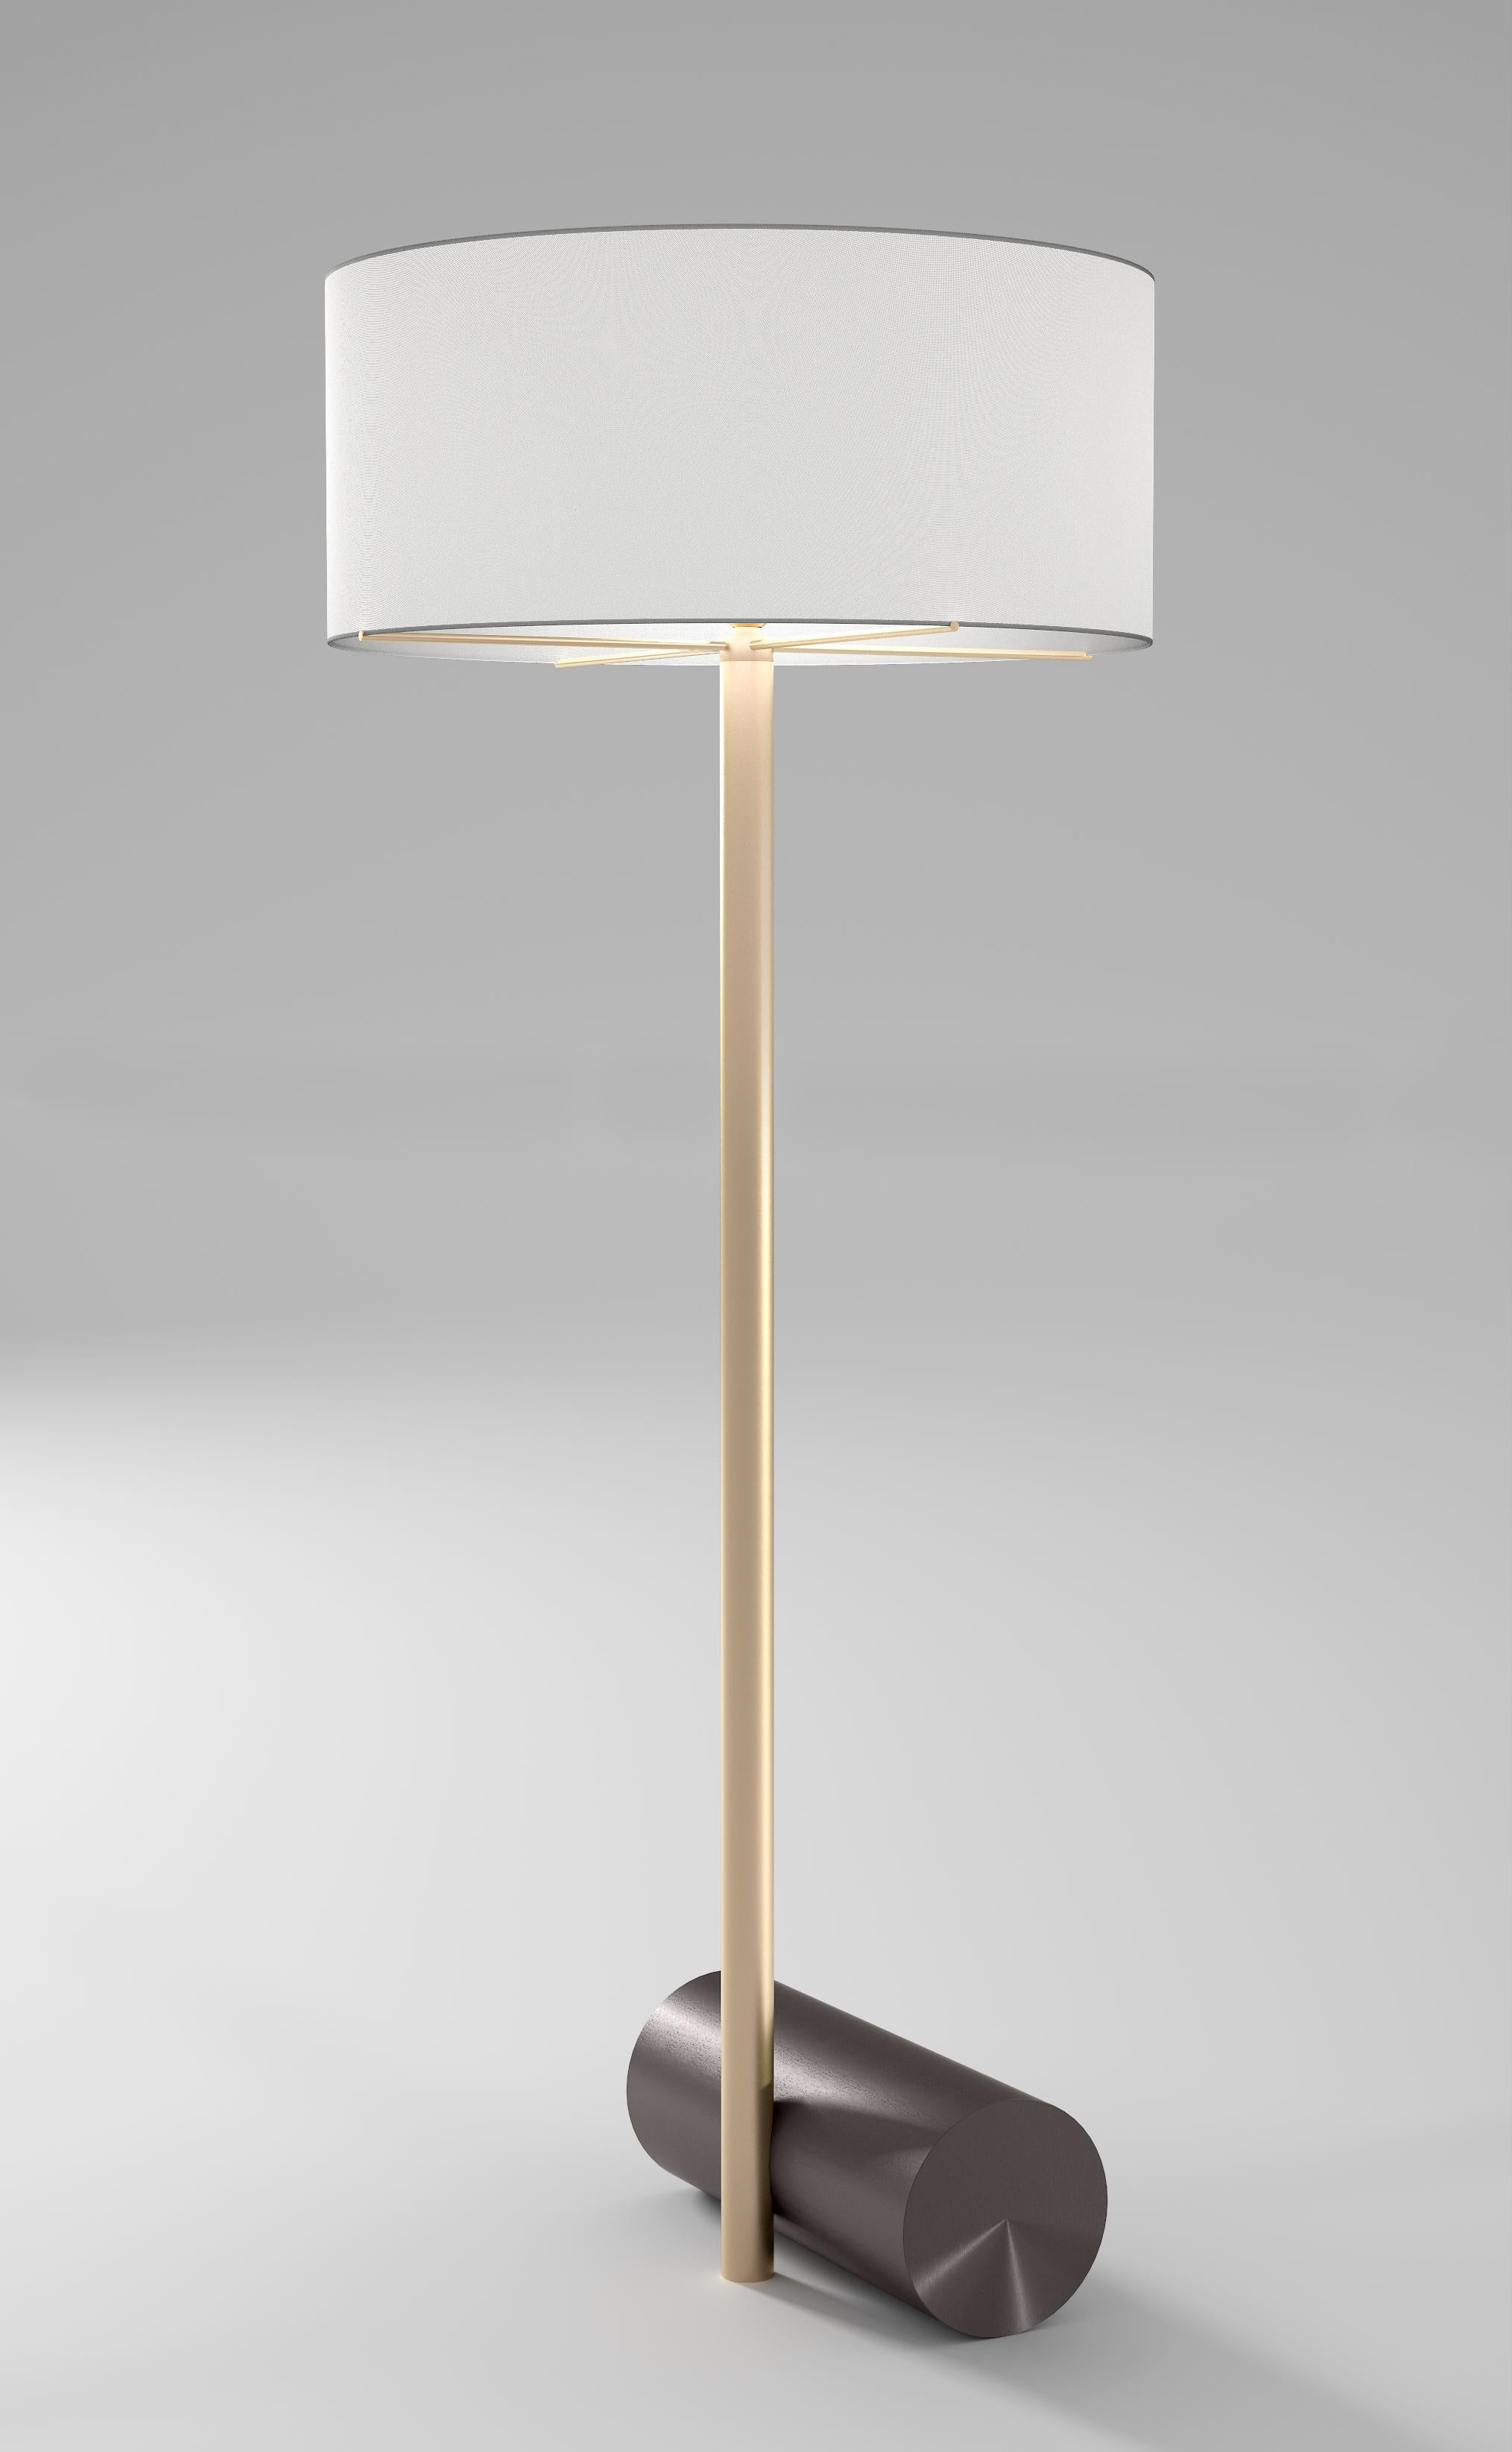 Calee XL floor lamp by Pool
Dimensions: D70 X H170 cm
Materials: Solid Brass, Polycarbonate, Textile cable (2m).
Others finishes and dimensions are available.

All our lamps can be wired according to each country. If sold to the USA it will be wired